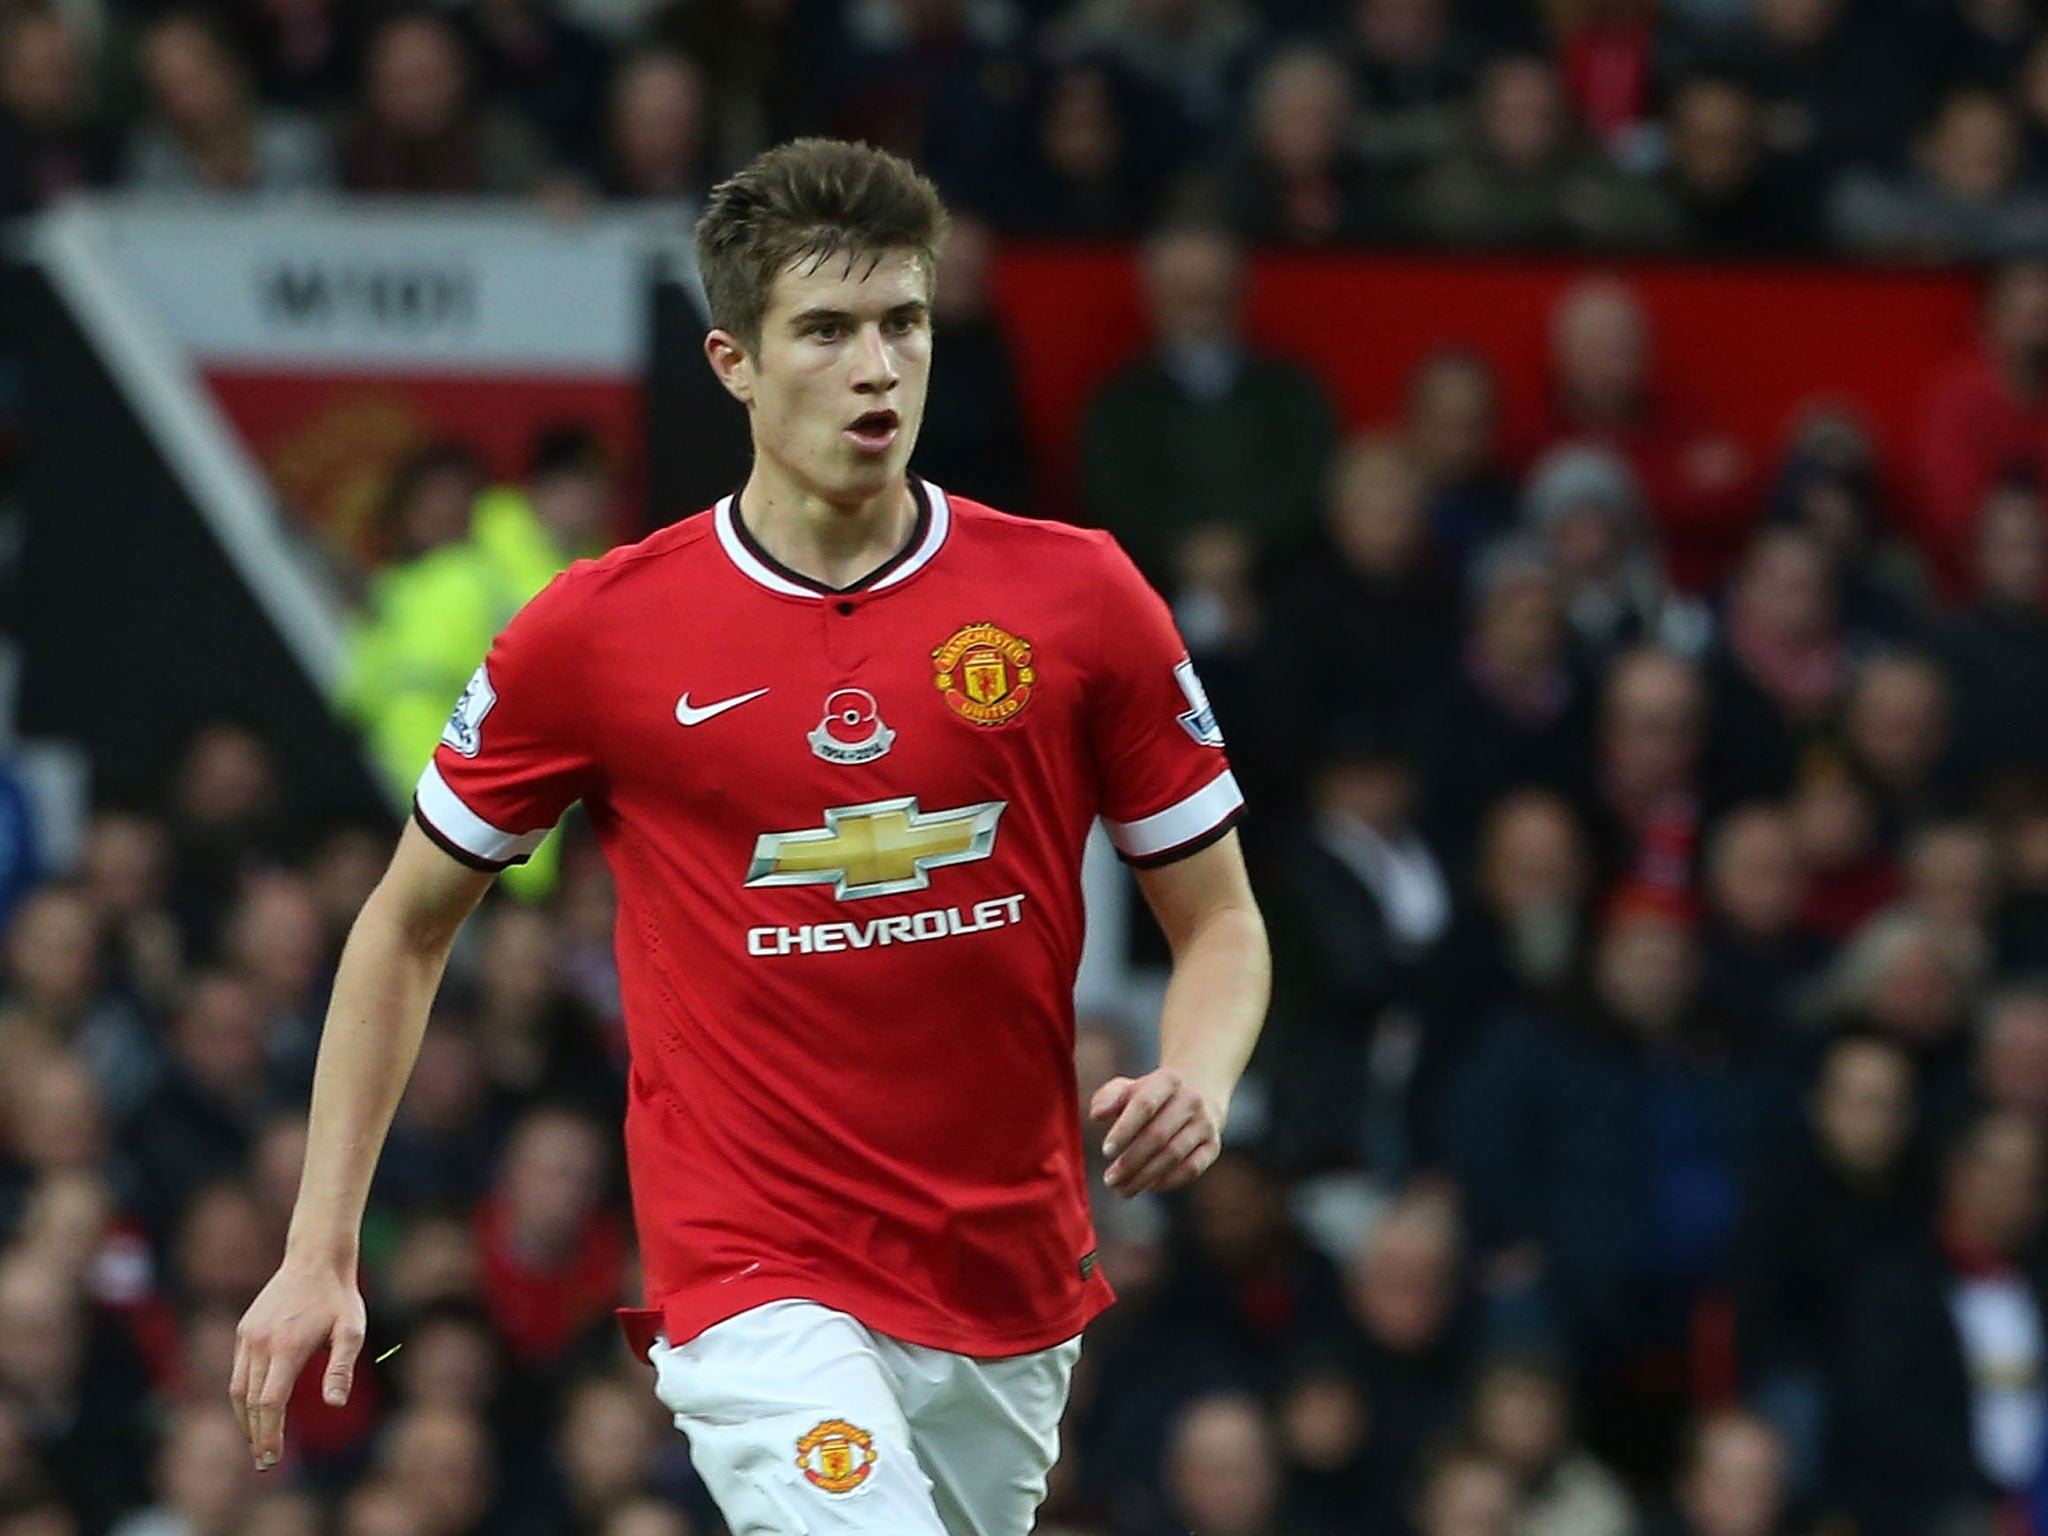 Manchester United defender Paddy McNair starts against Burnley